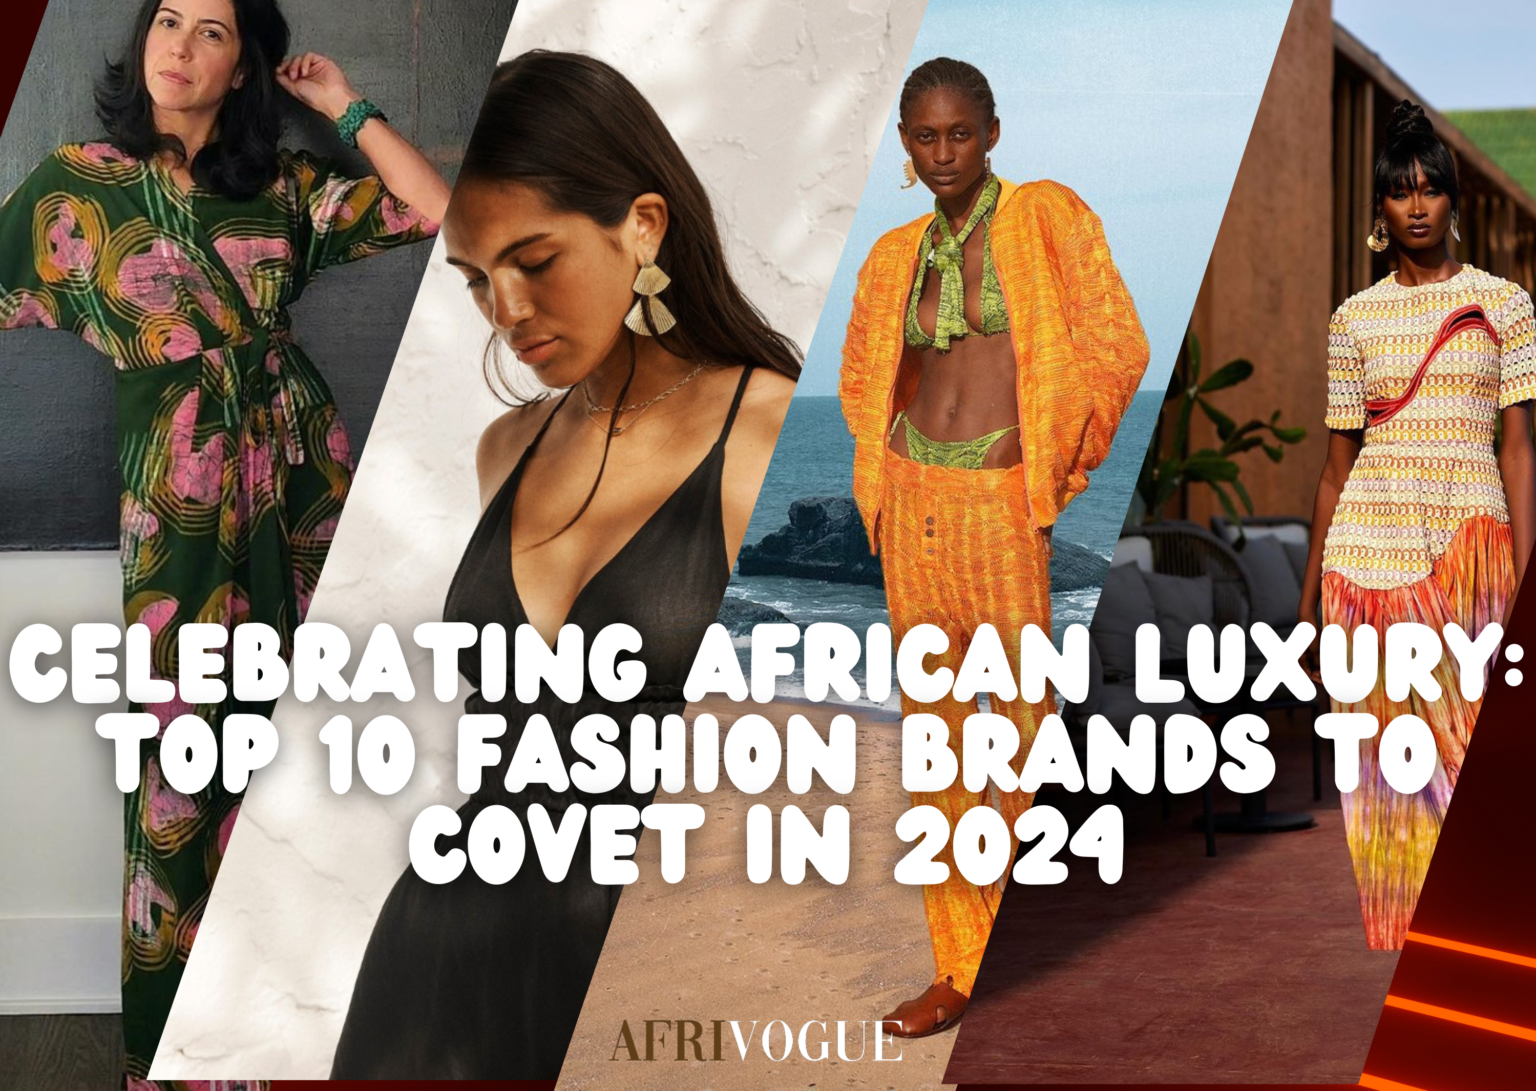 Top 10 Fashion Brands to Covet in 2024